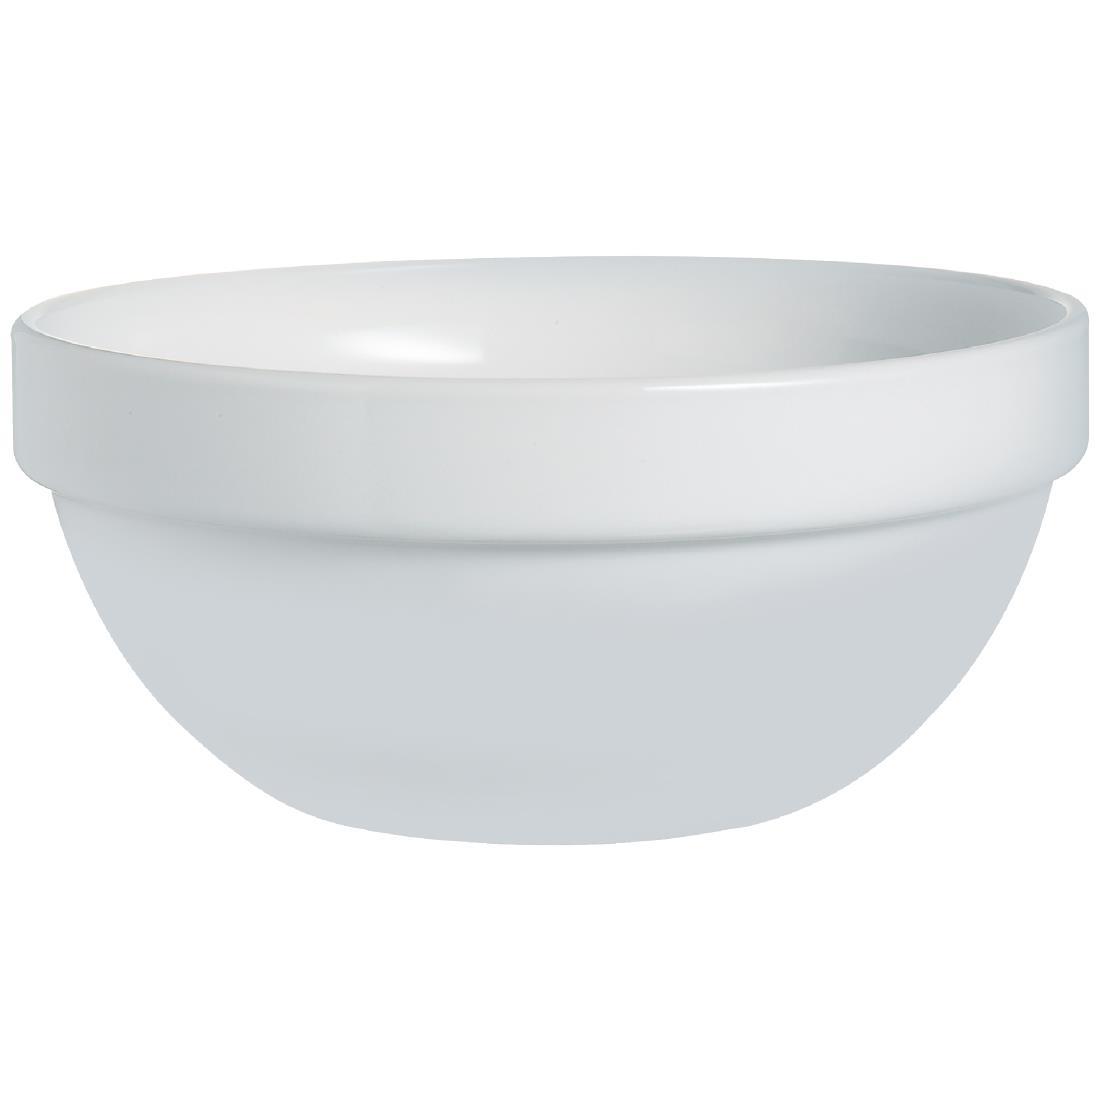 Arcoroc Opal Stackable Bowls 172mm (Pack of 6) - DP068  - 1